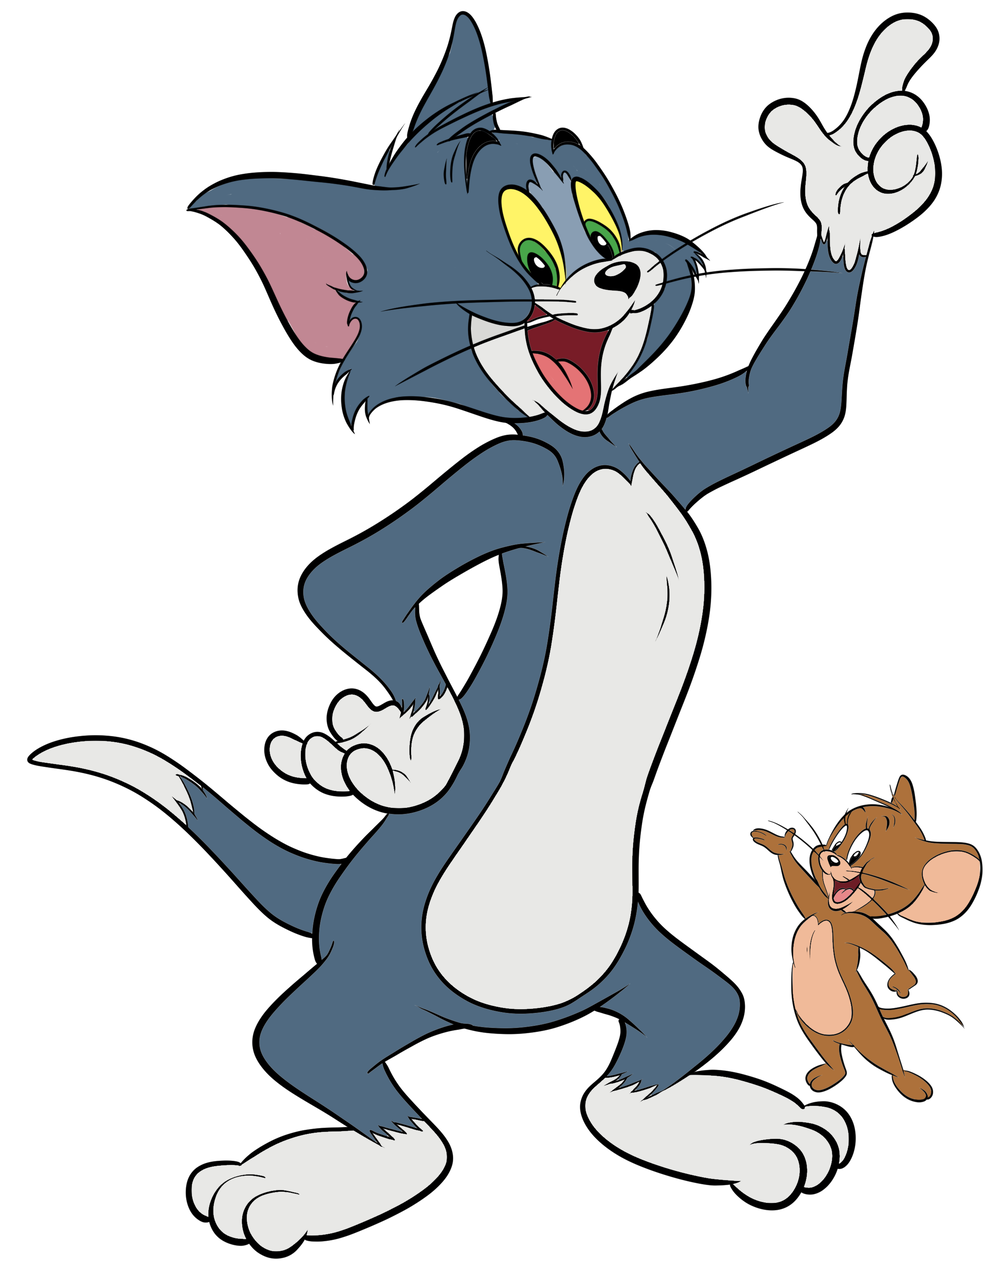 The Ultimate Collection of Tom & Jerry Images Over 999+ Photos in